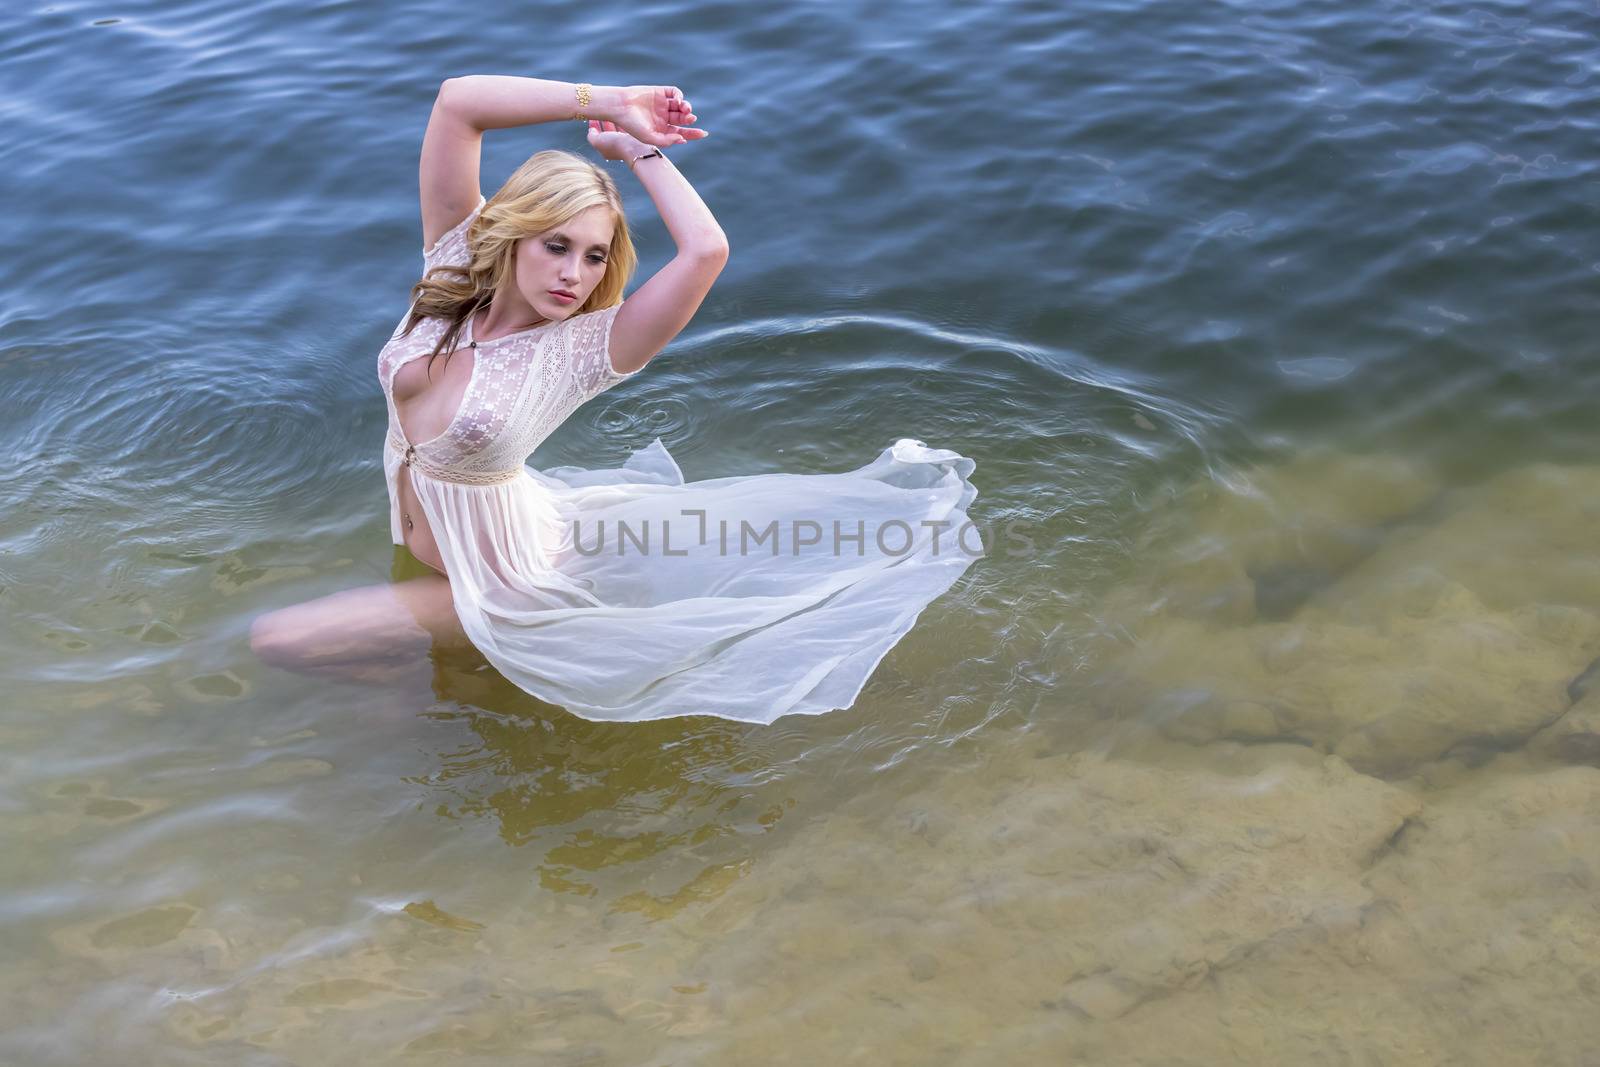 A Lovely Blonde Model Enjoys A Day At The Lake by actionsports